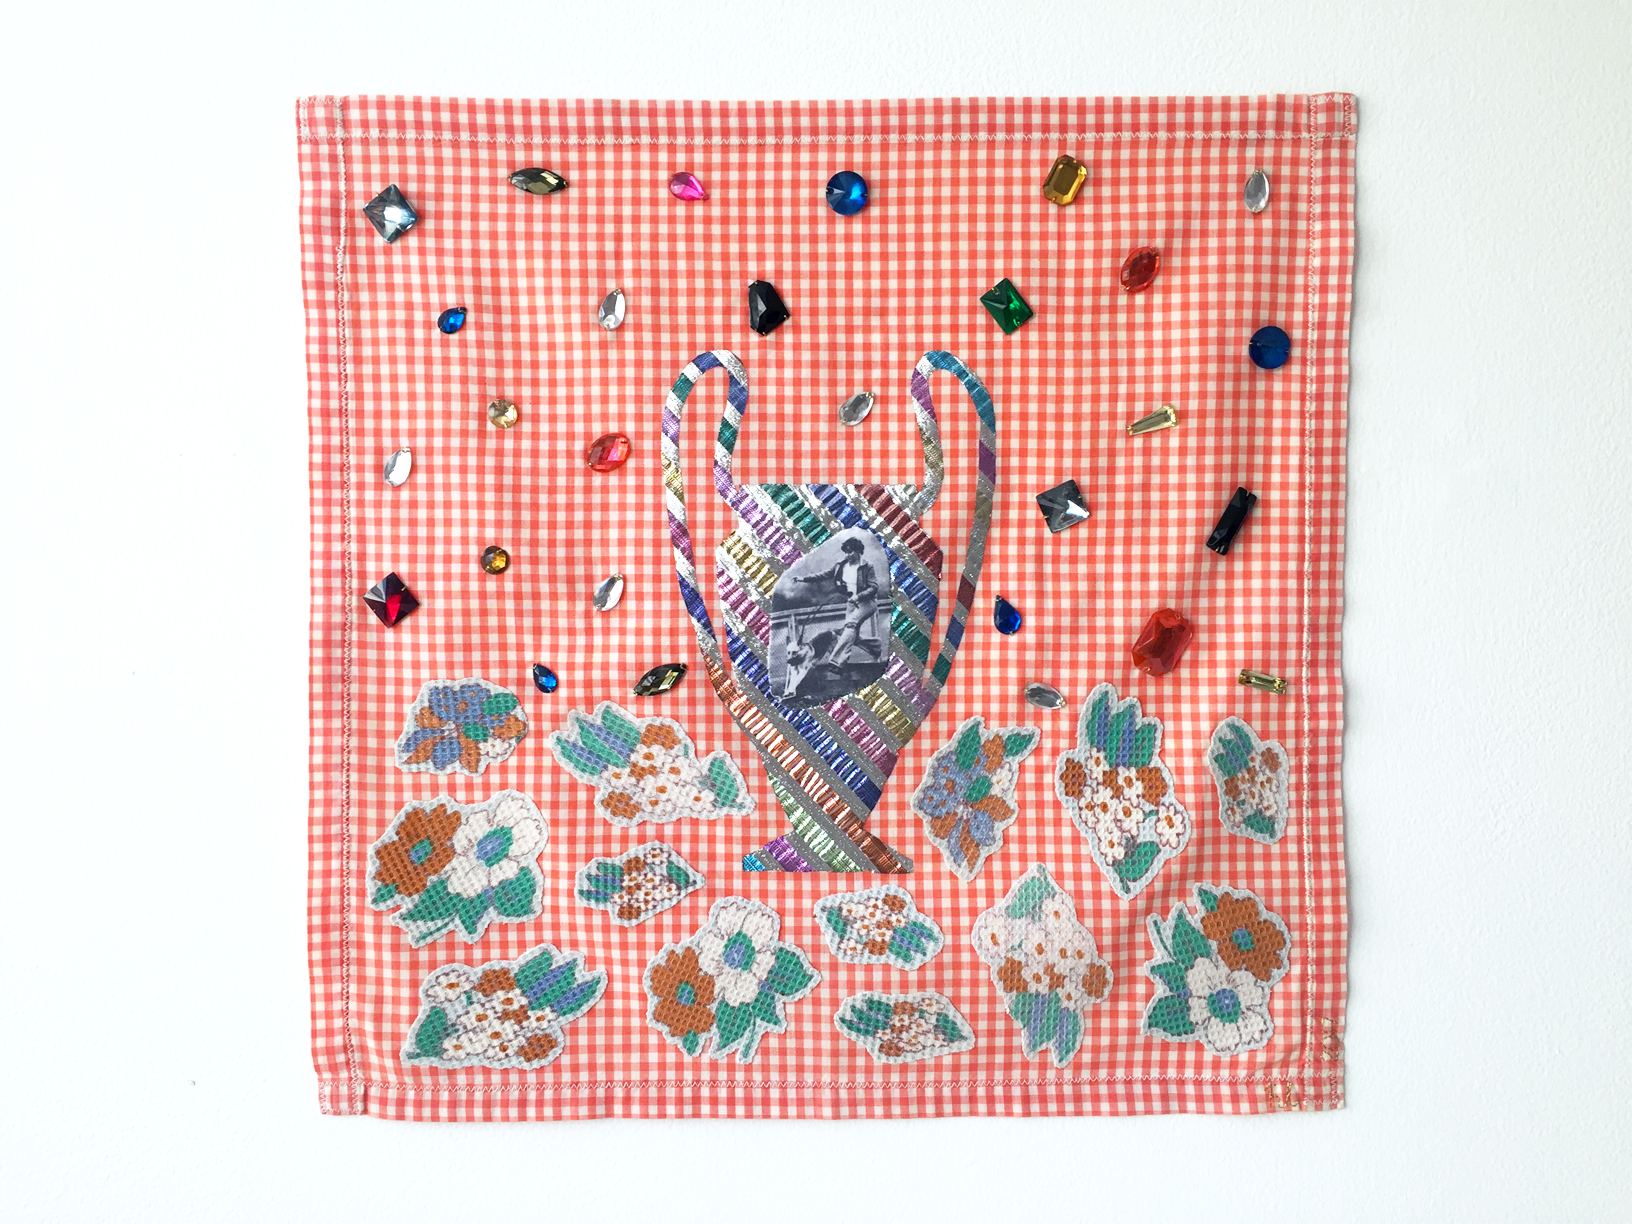 Number 1 Best Friend #4, 2017, textile object, found fabric on handmade cotton placemat, digital print on cotton, polyester, found plastic gems, 395mm x 385mm